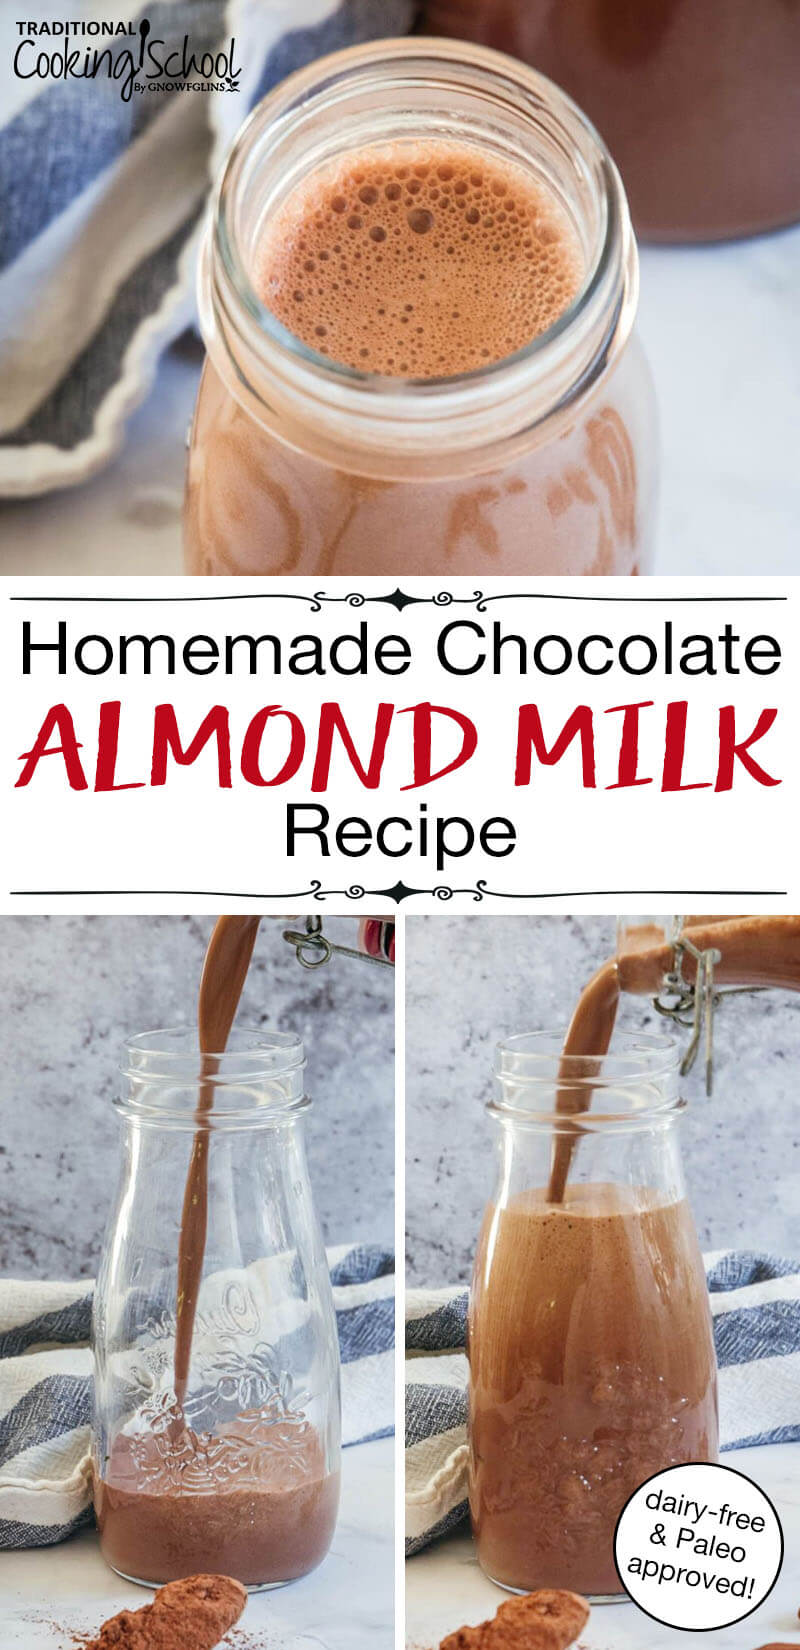 photo collage of chocolate milk, with text overlay: "Homemade Chocolate Almond Milk Recipe (dairy-free & Paleo approved!)"